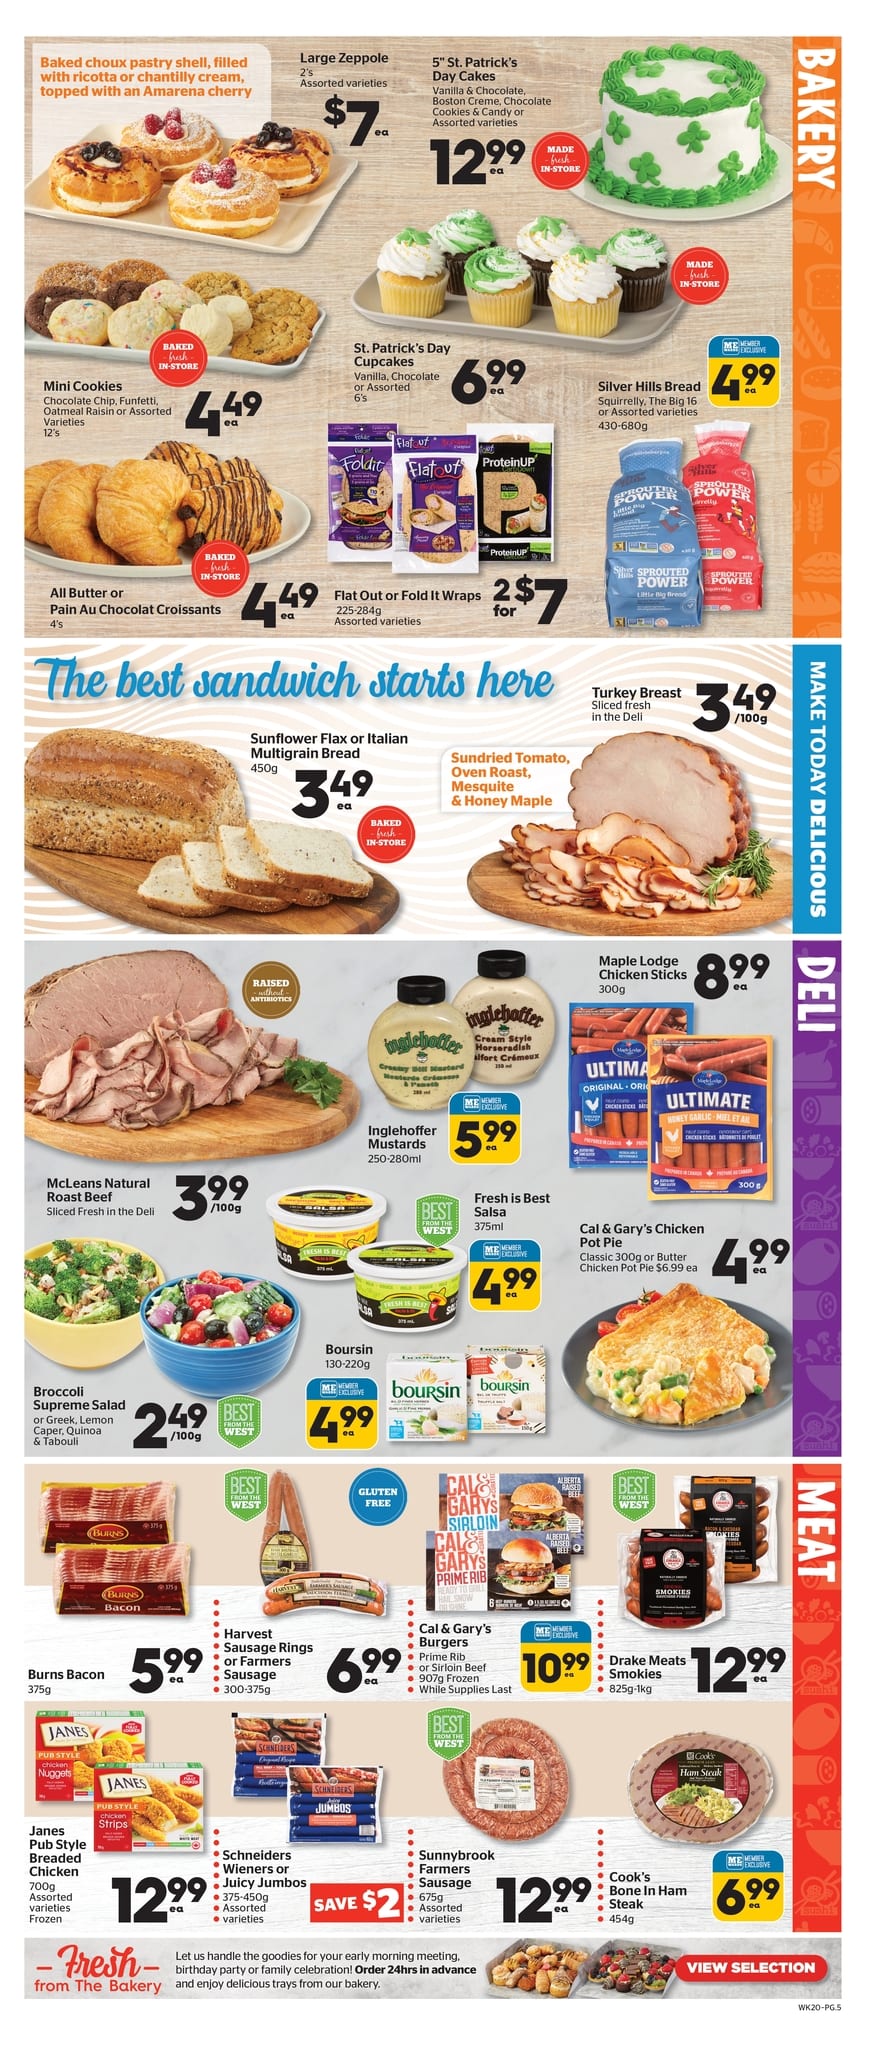 Calgary Co-op - Weekly Flyer Specials - Page 5